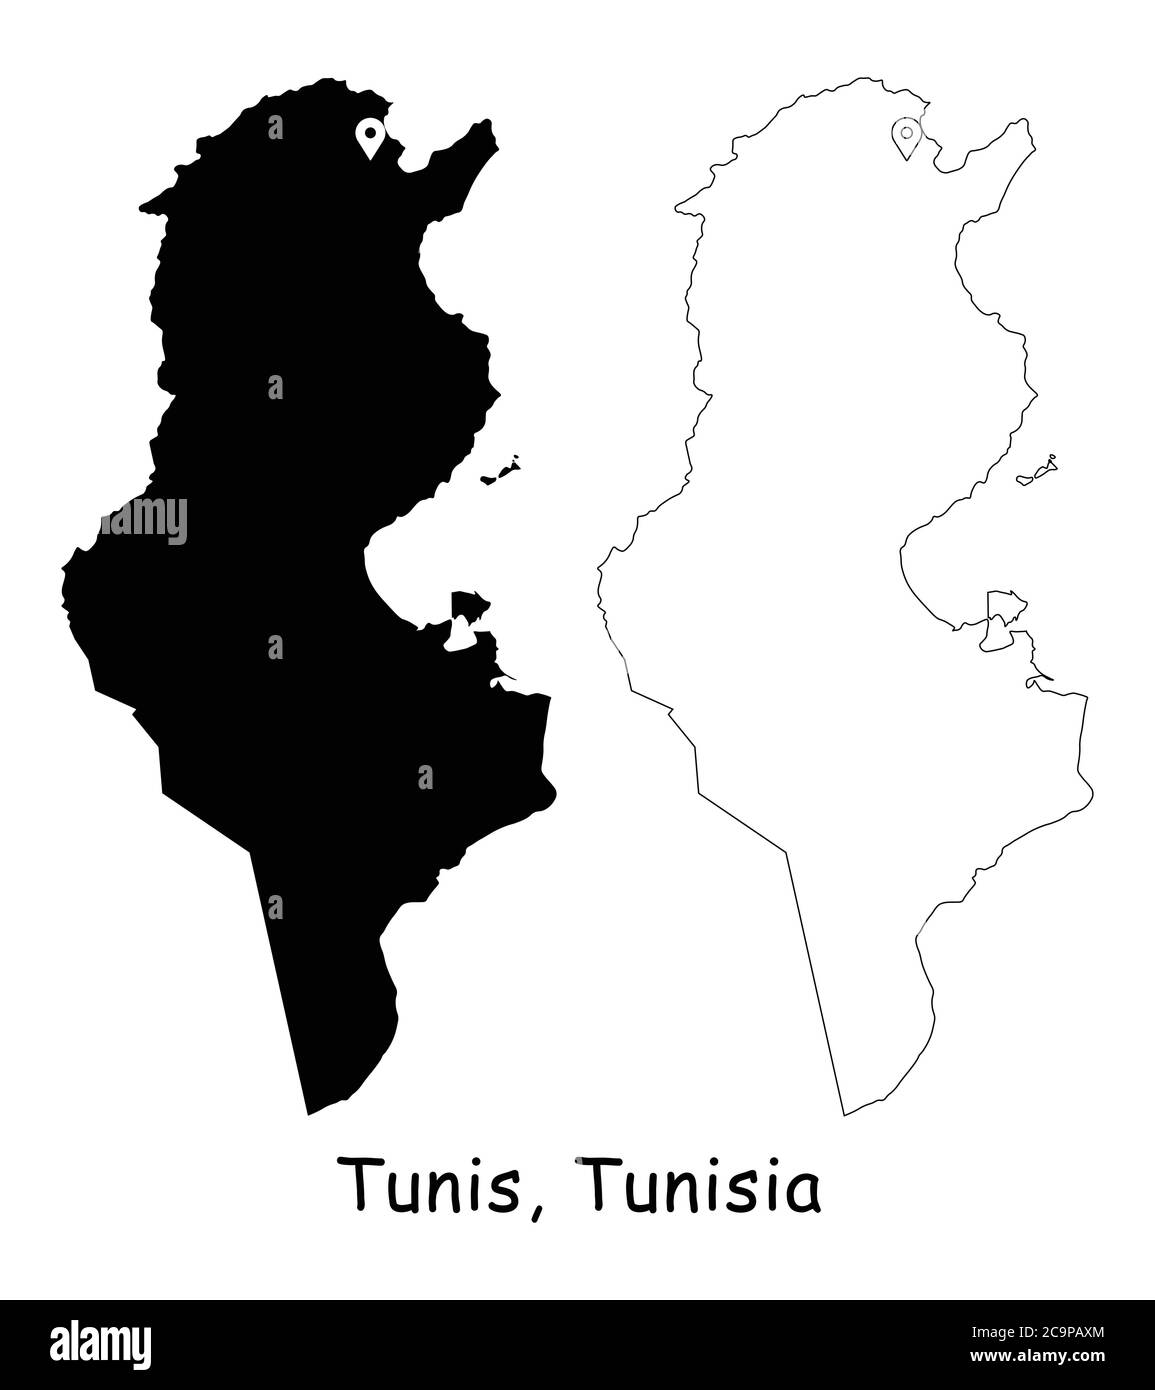 Tunis, Tunisia. Detailed Country Map with Location Pin on Capital City. Black silhouette and outline maps isolated on white background. EPS Vector Stock Vector